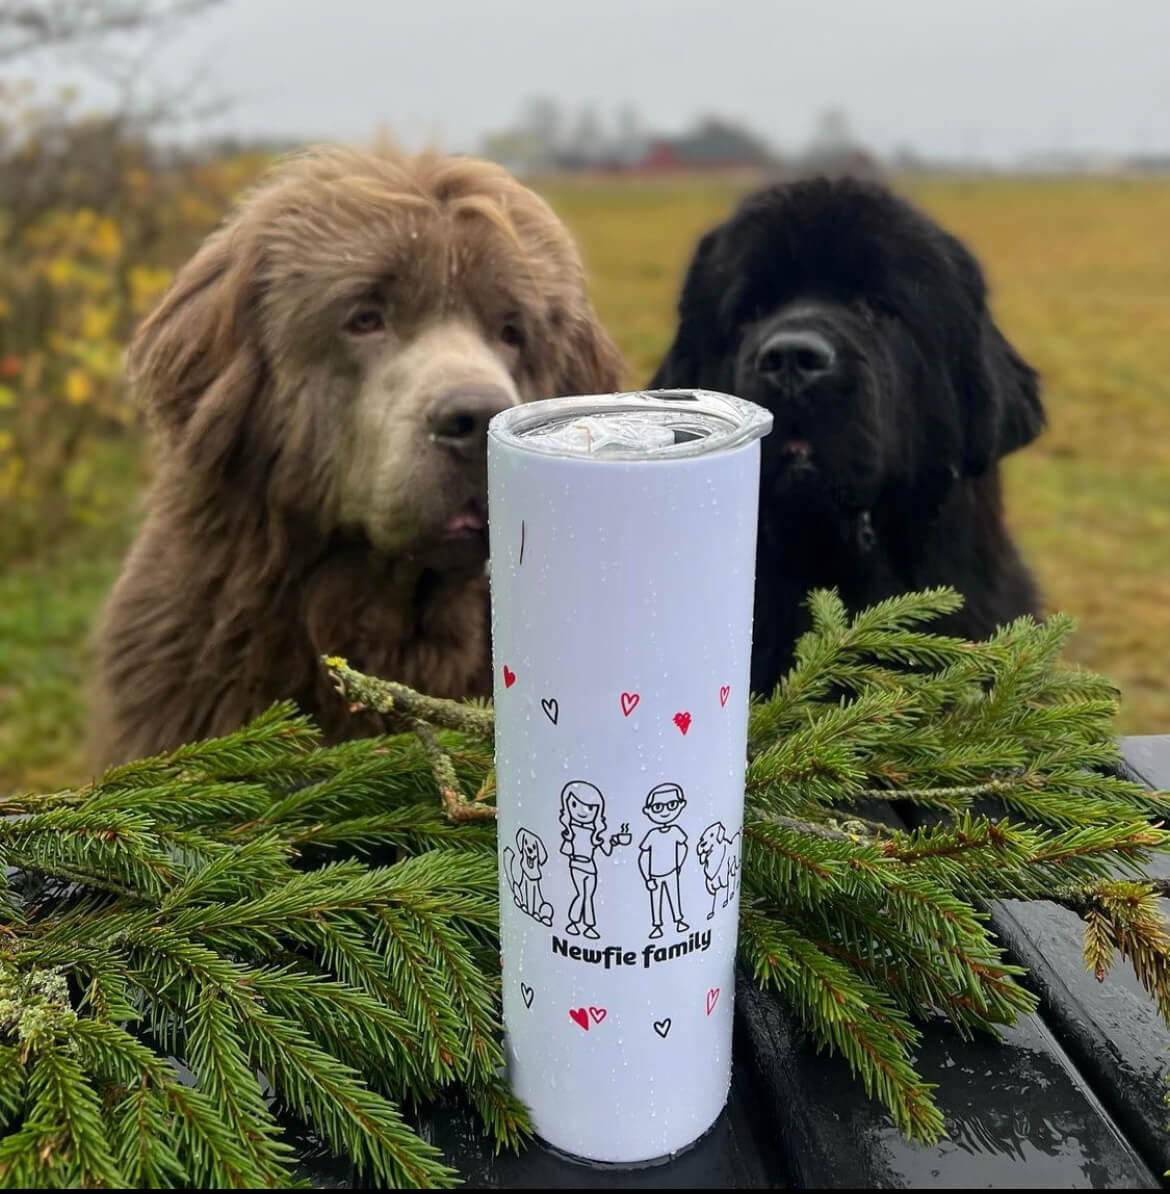 Personalised travel thermos mug with dog and couple figures